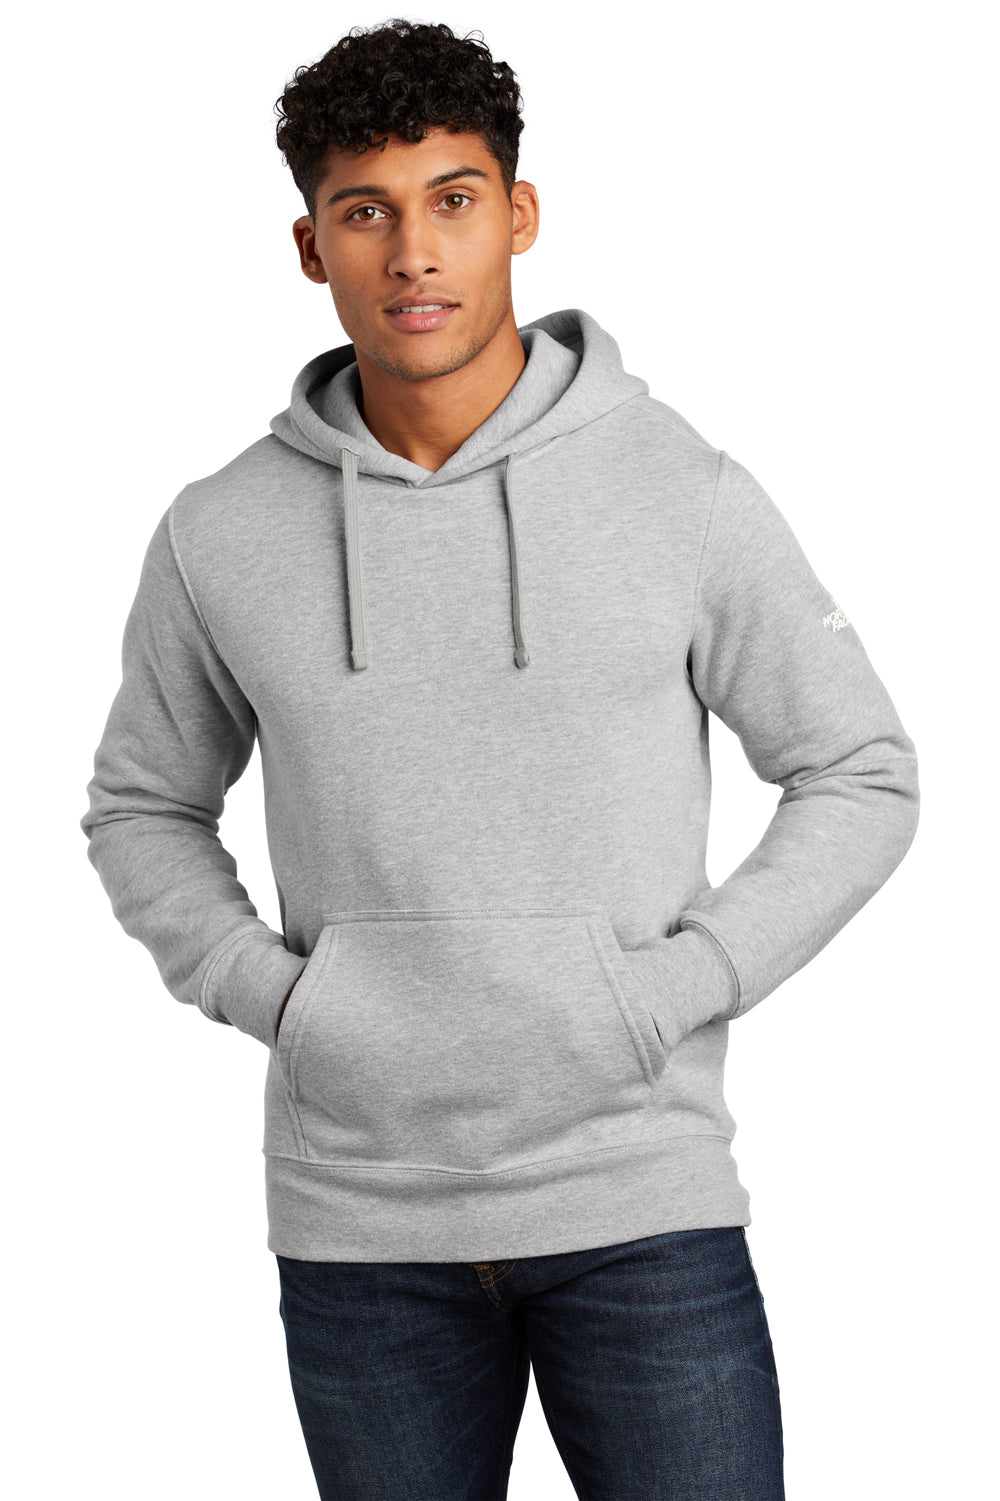 The North Face Mens Hooded Sweatshirt Hoodie Heather Light Grey Front